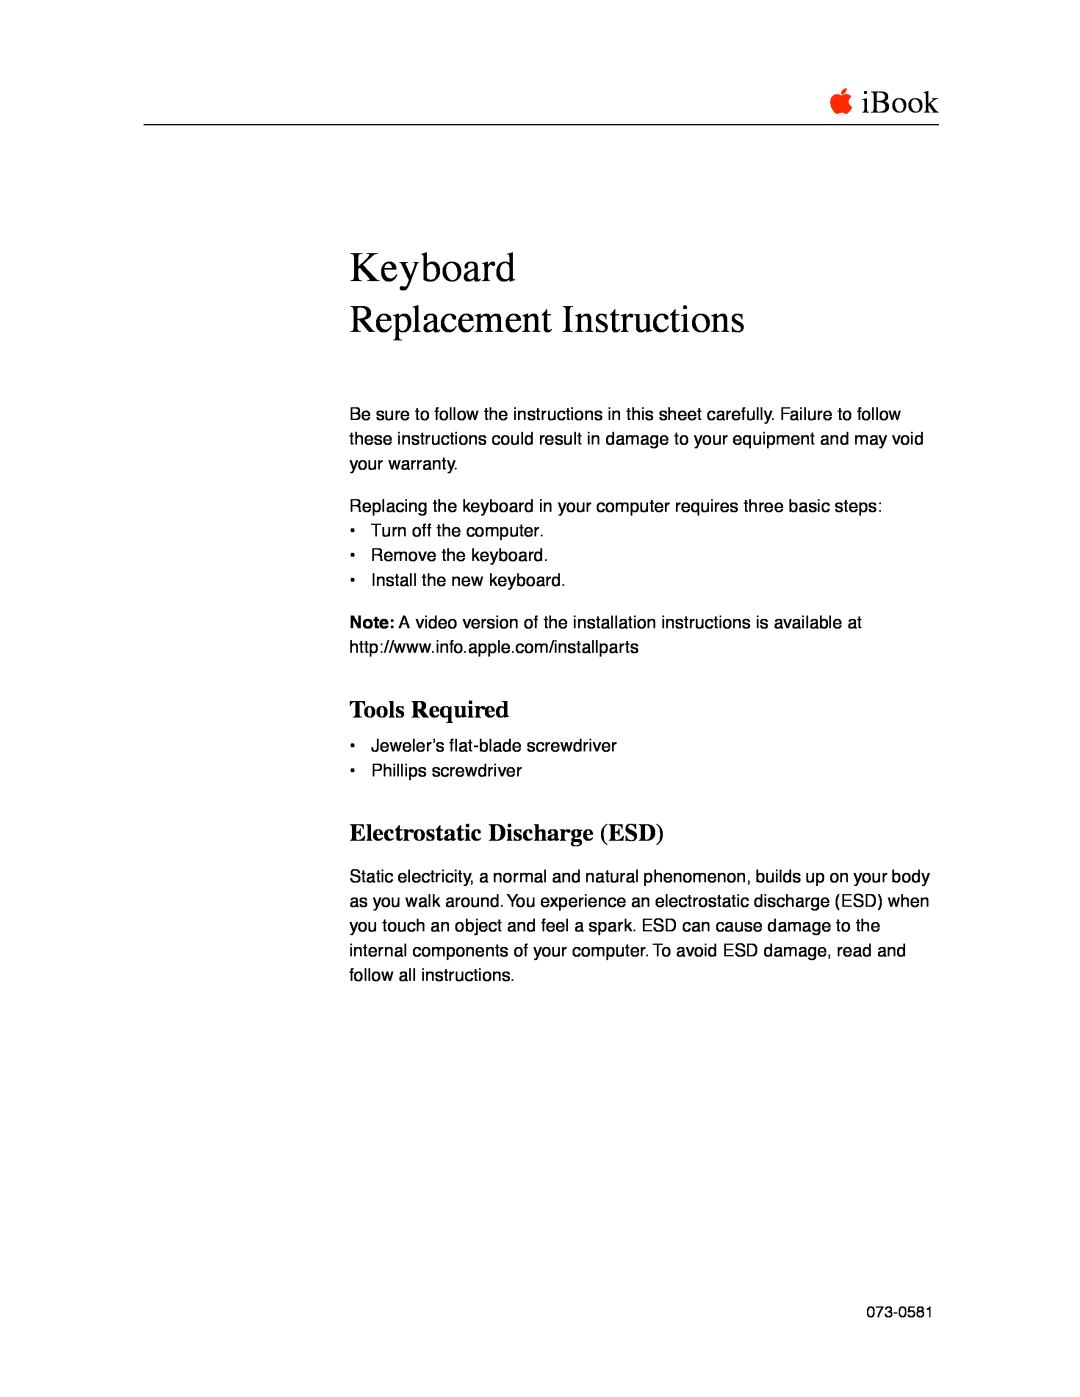 Apple 073-0581 warranty Tools Required, Electrostatic Discharge ESD, Keyboard, Replacement Instructions, K iBook 